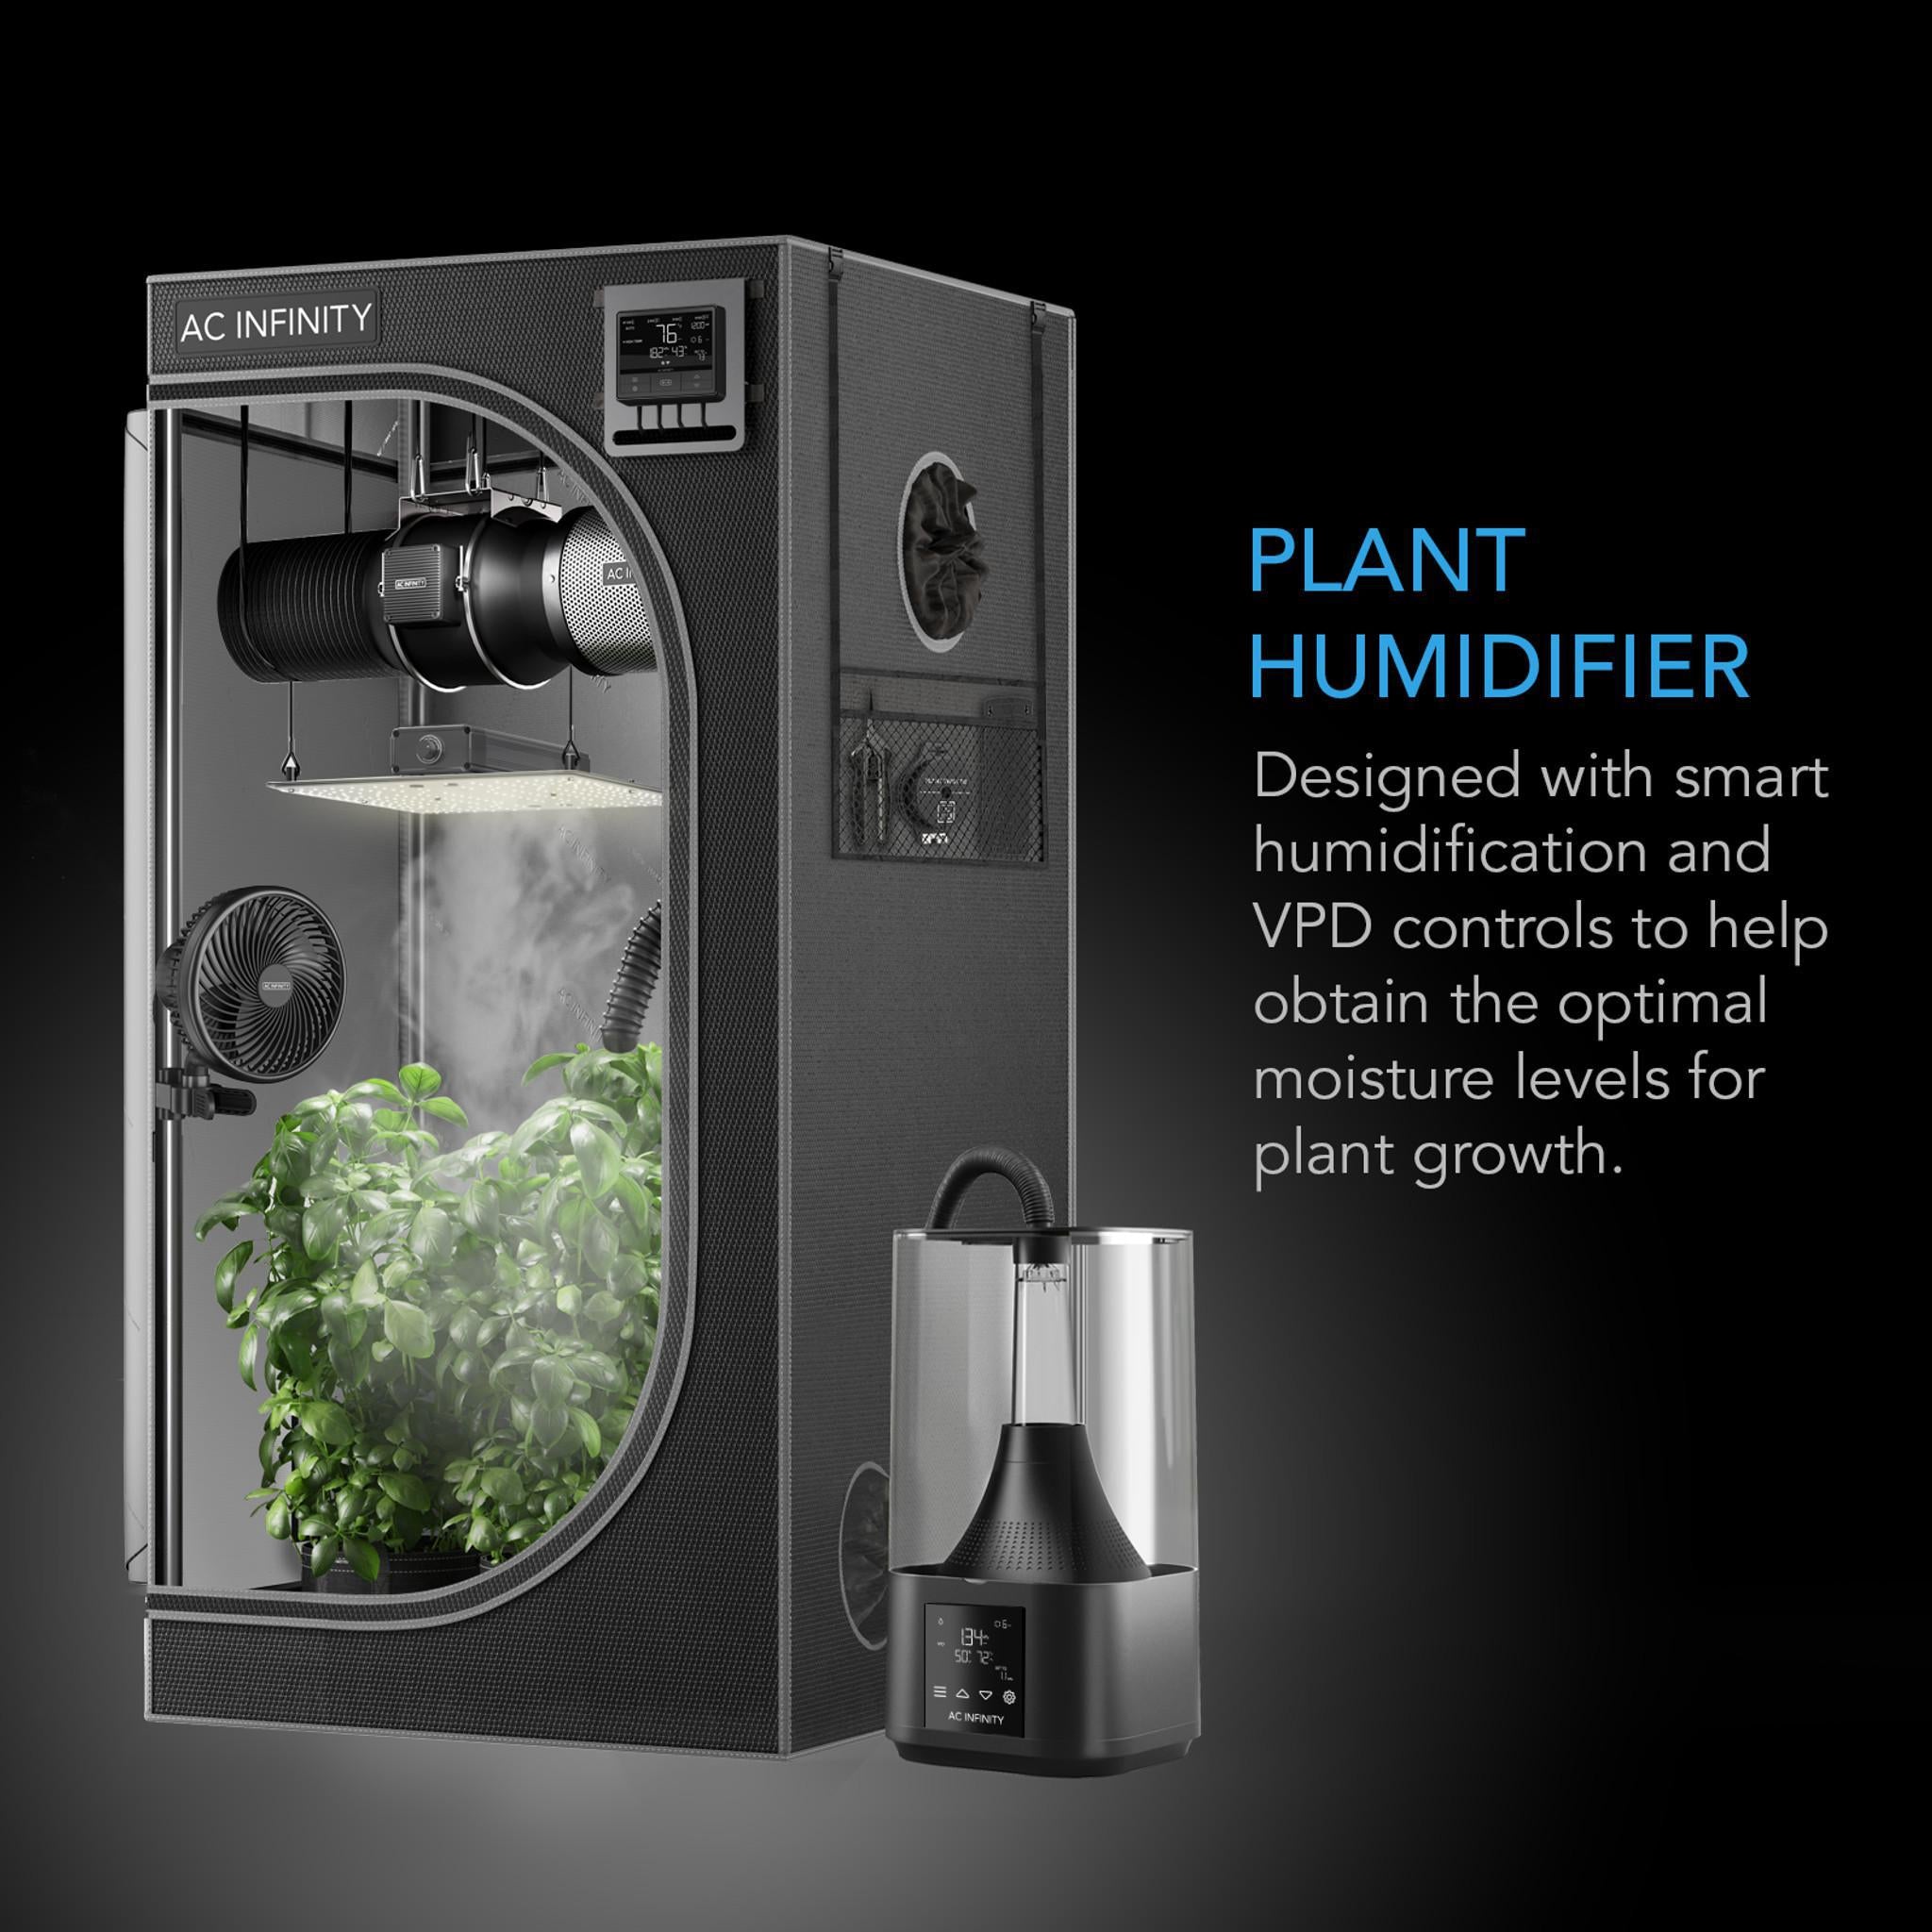 HUMIDIFIER 4.5L - CLOUDFORGE T3